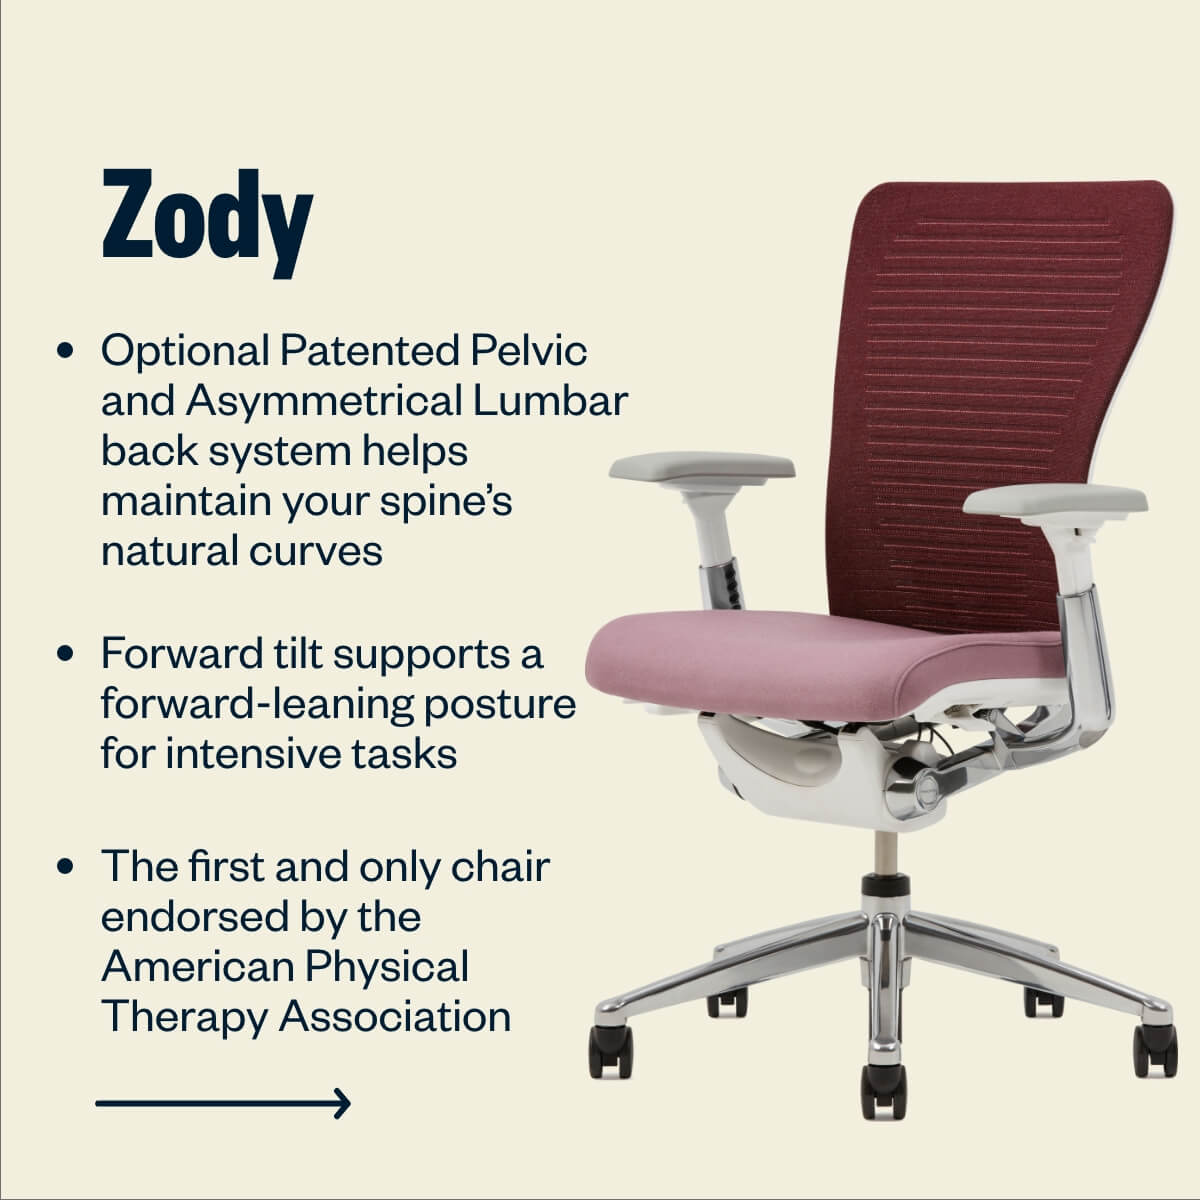 Zody chair overall